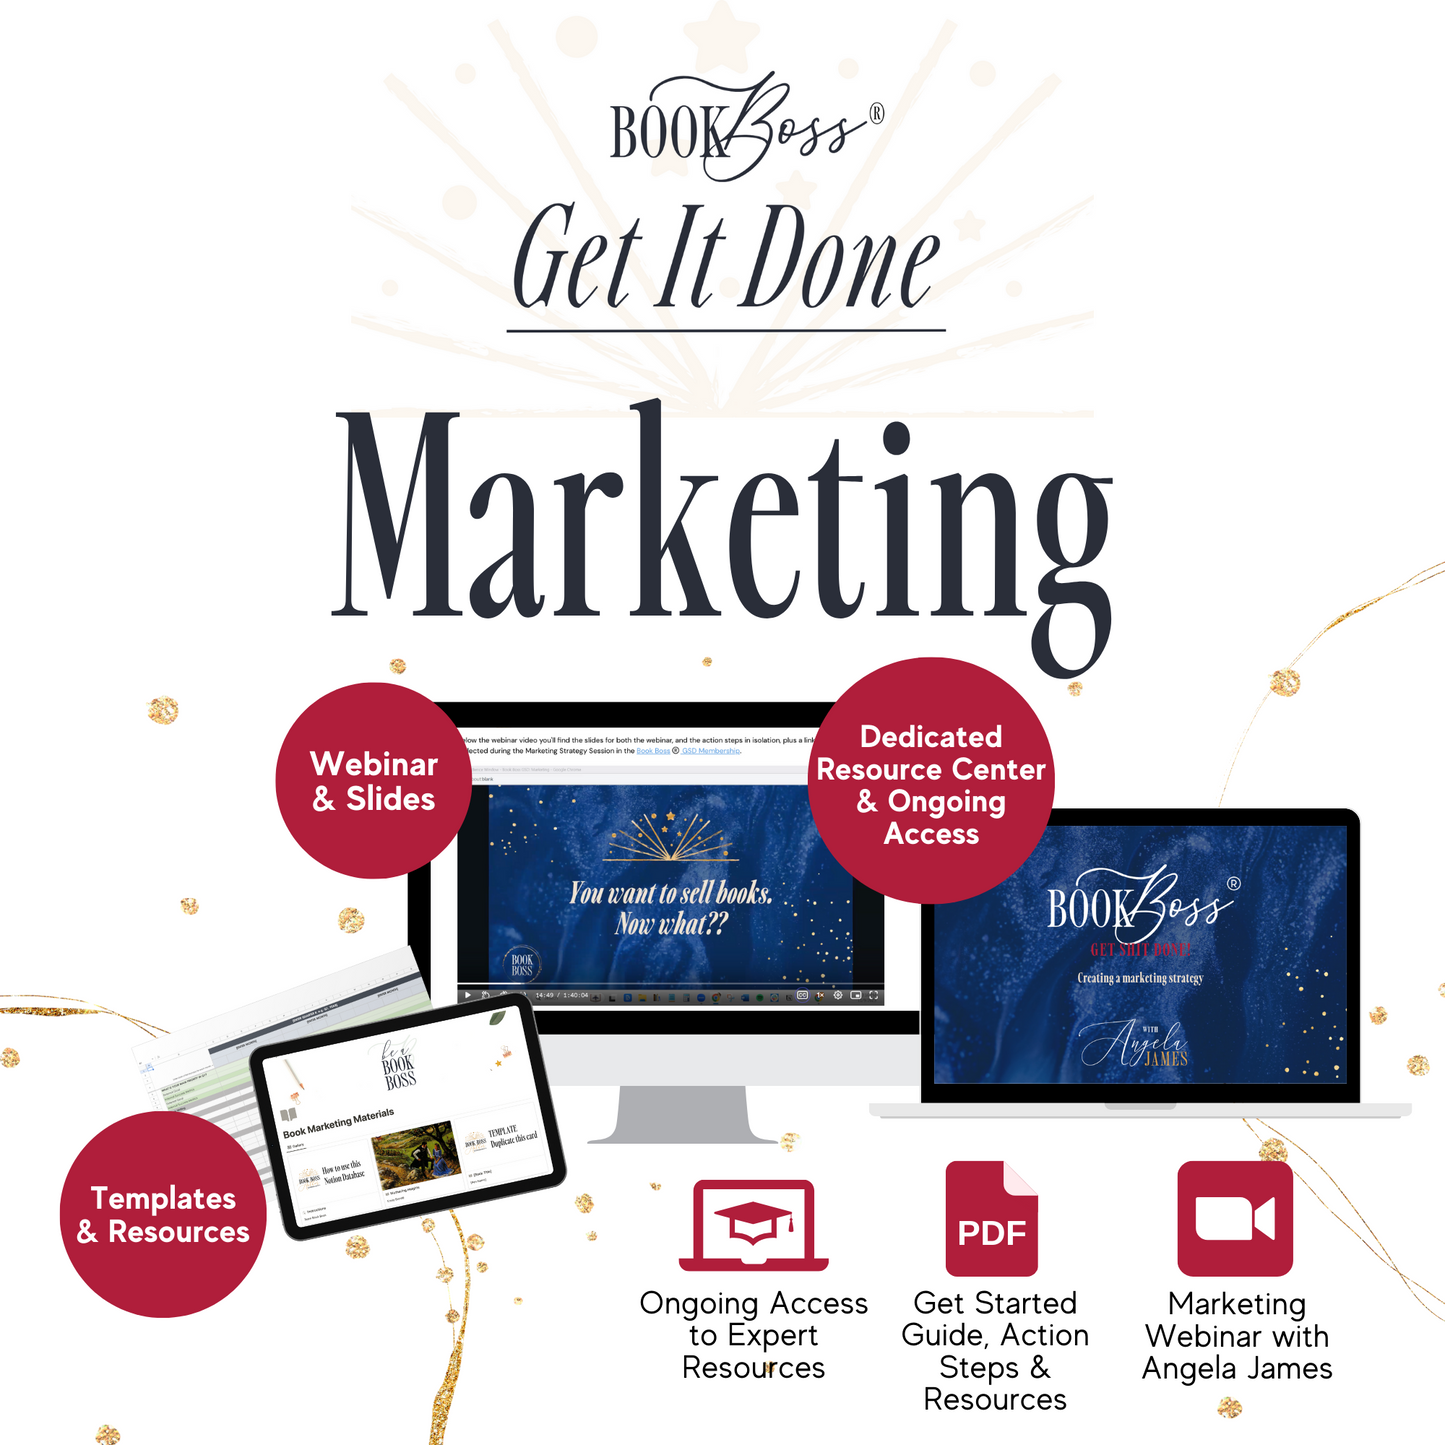 Promotional image for Book Boss' "Get It Done Marketing" course with webinars, templates, and a dedicated resource center.